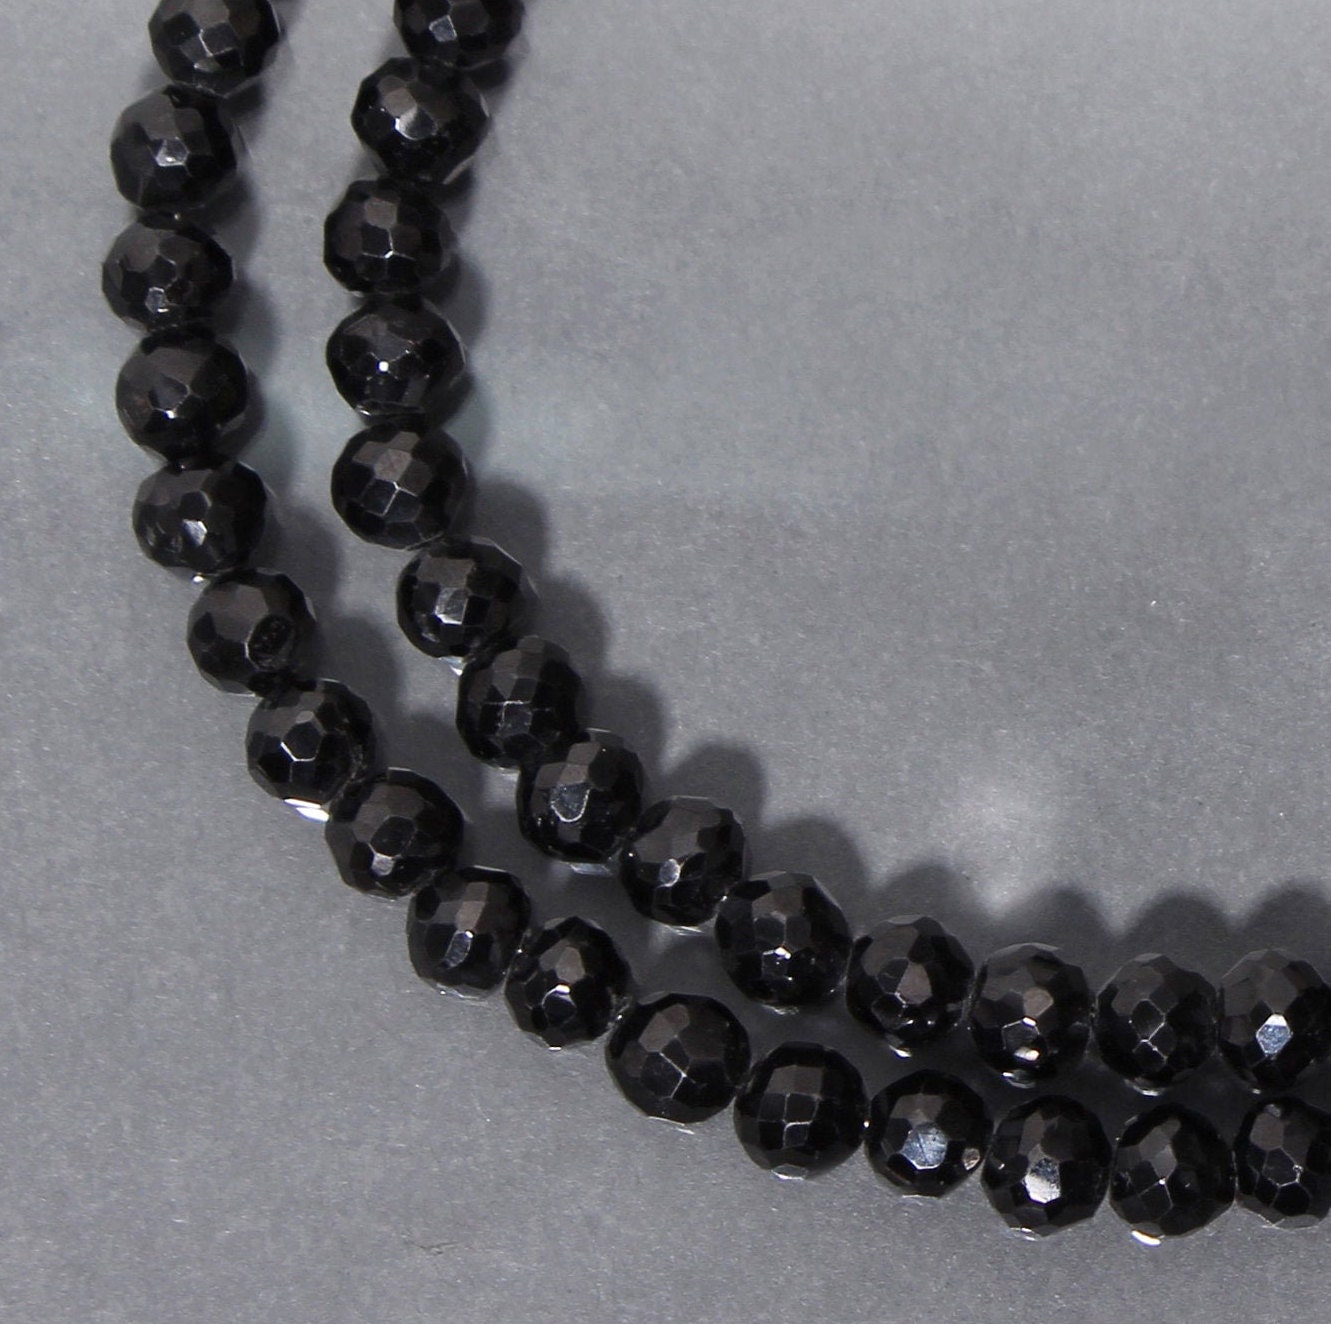 Black Spinel 8mm Diamond Cut Large Hole Faceted Rondelle Beads – Allegory  Gallery